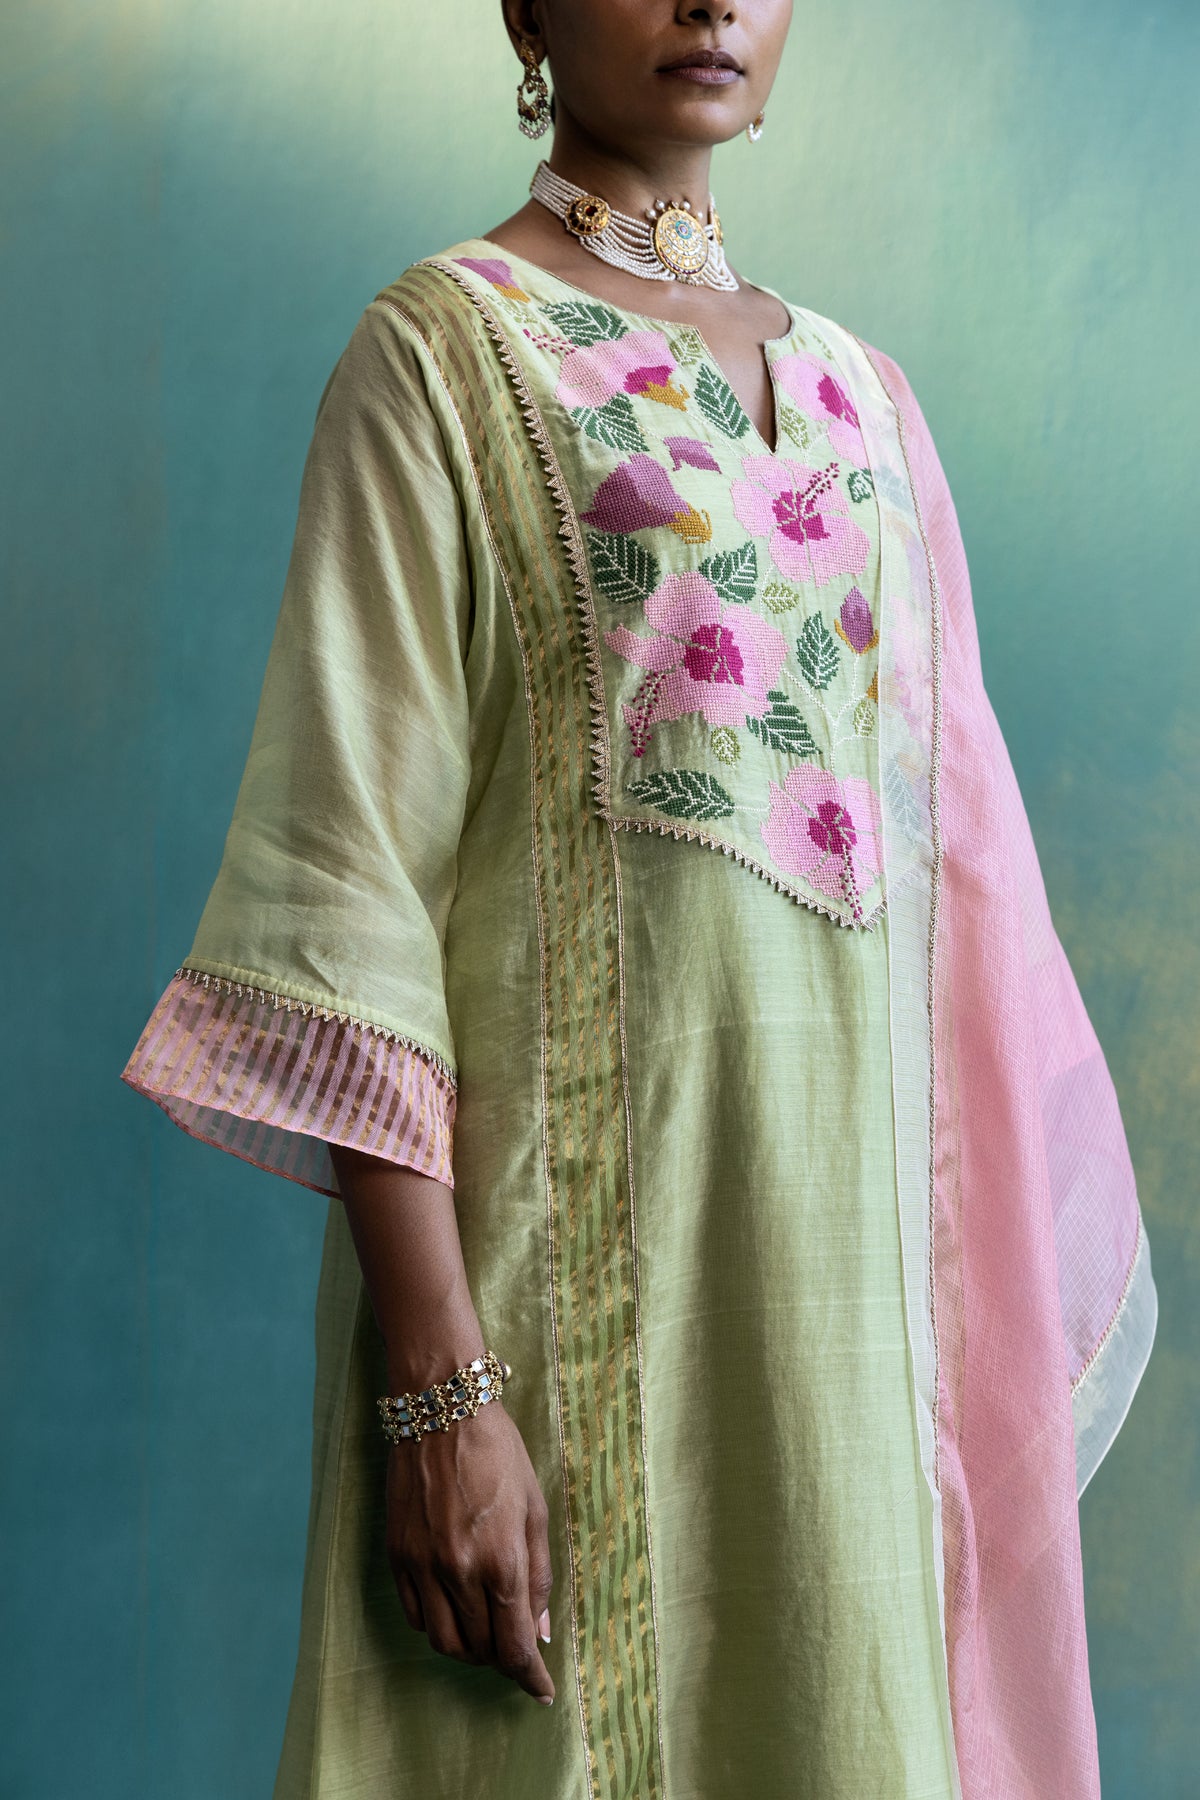 DIL-KASH OLIVE GREEN YOKE FLORAL EMBROIDERY CHOGA